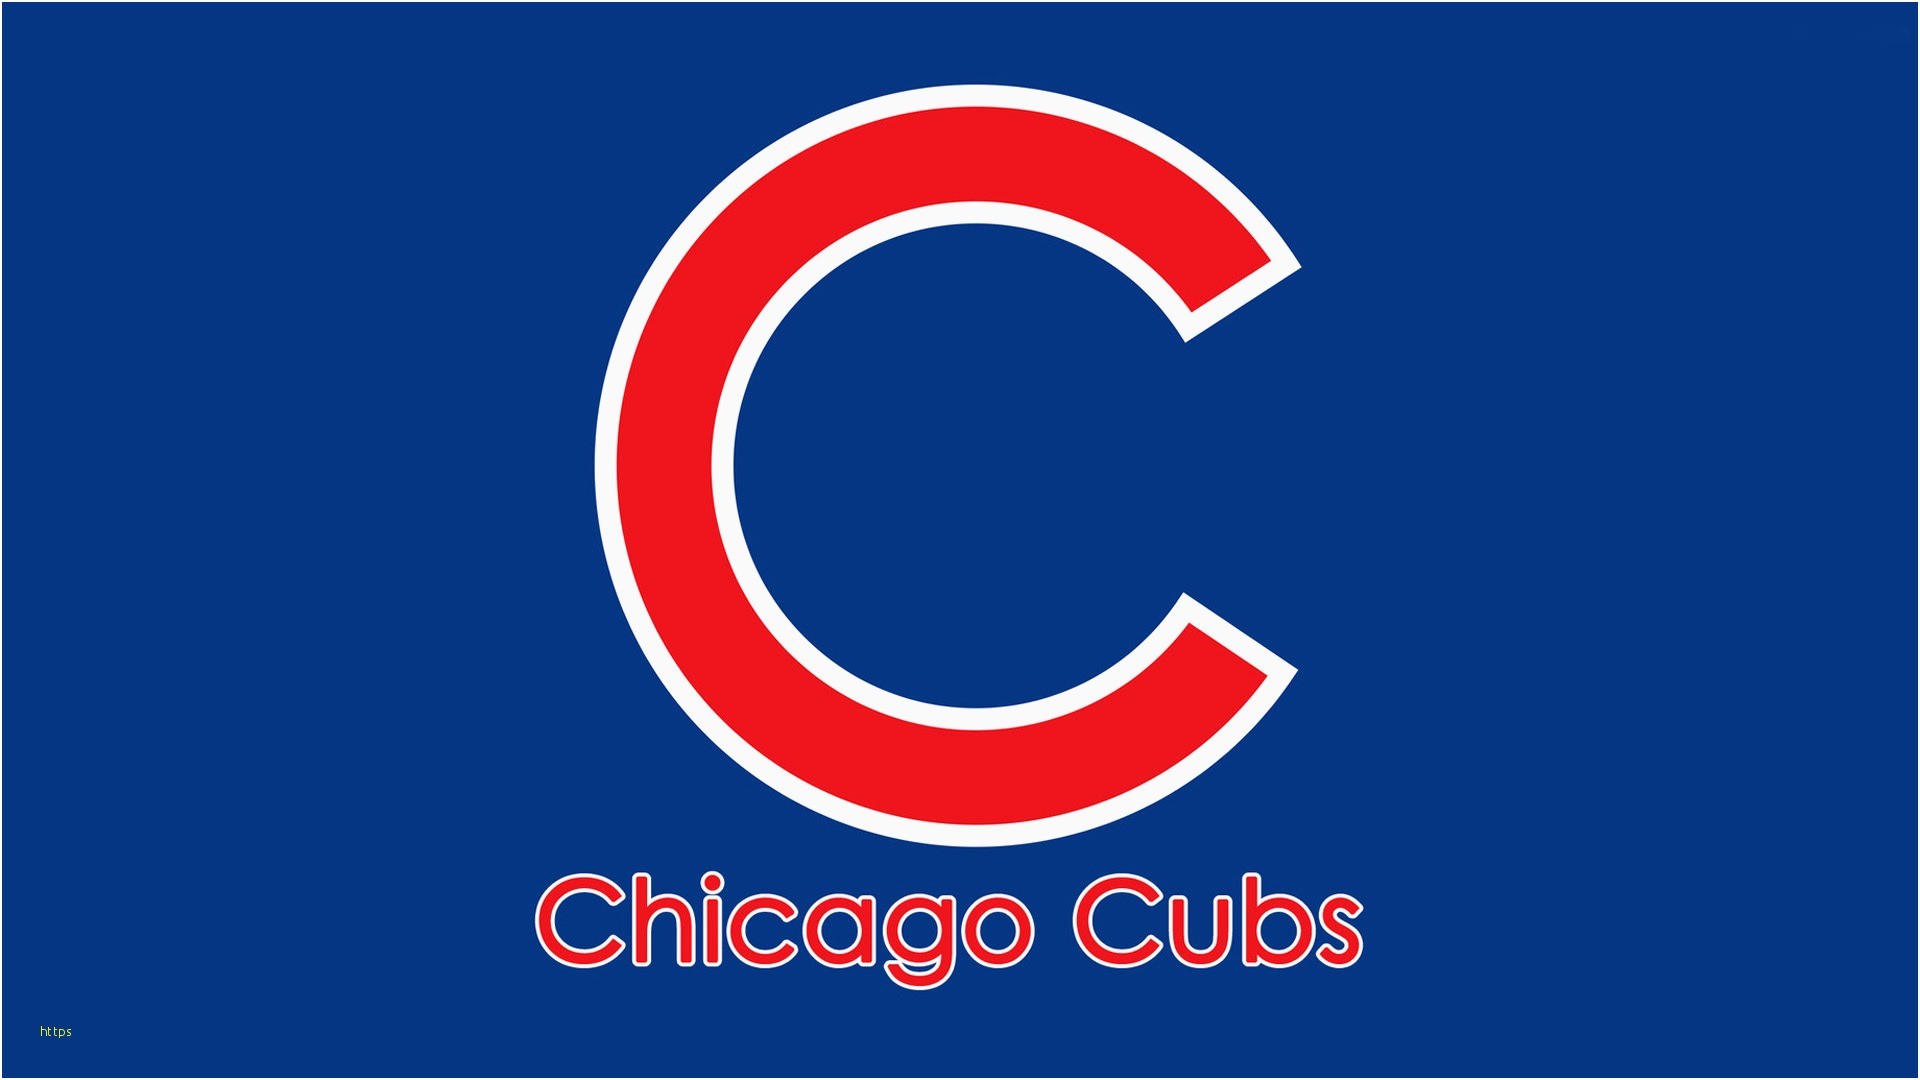 1920x1080 Chicago Cubs Wallpaper Fresh Chicago Cubs Wallpapers S Backgrounds ...